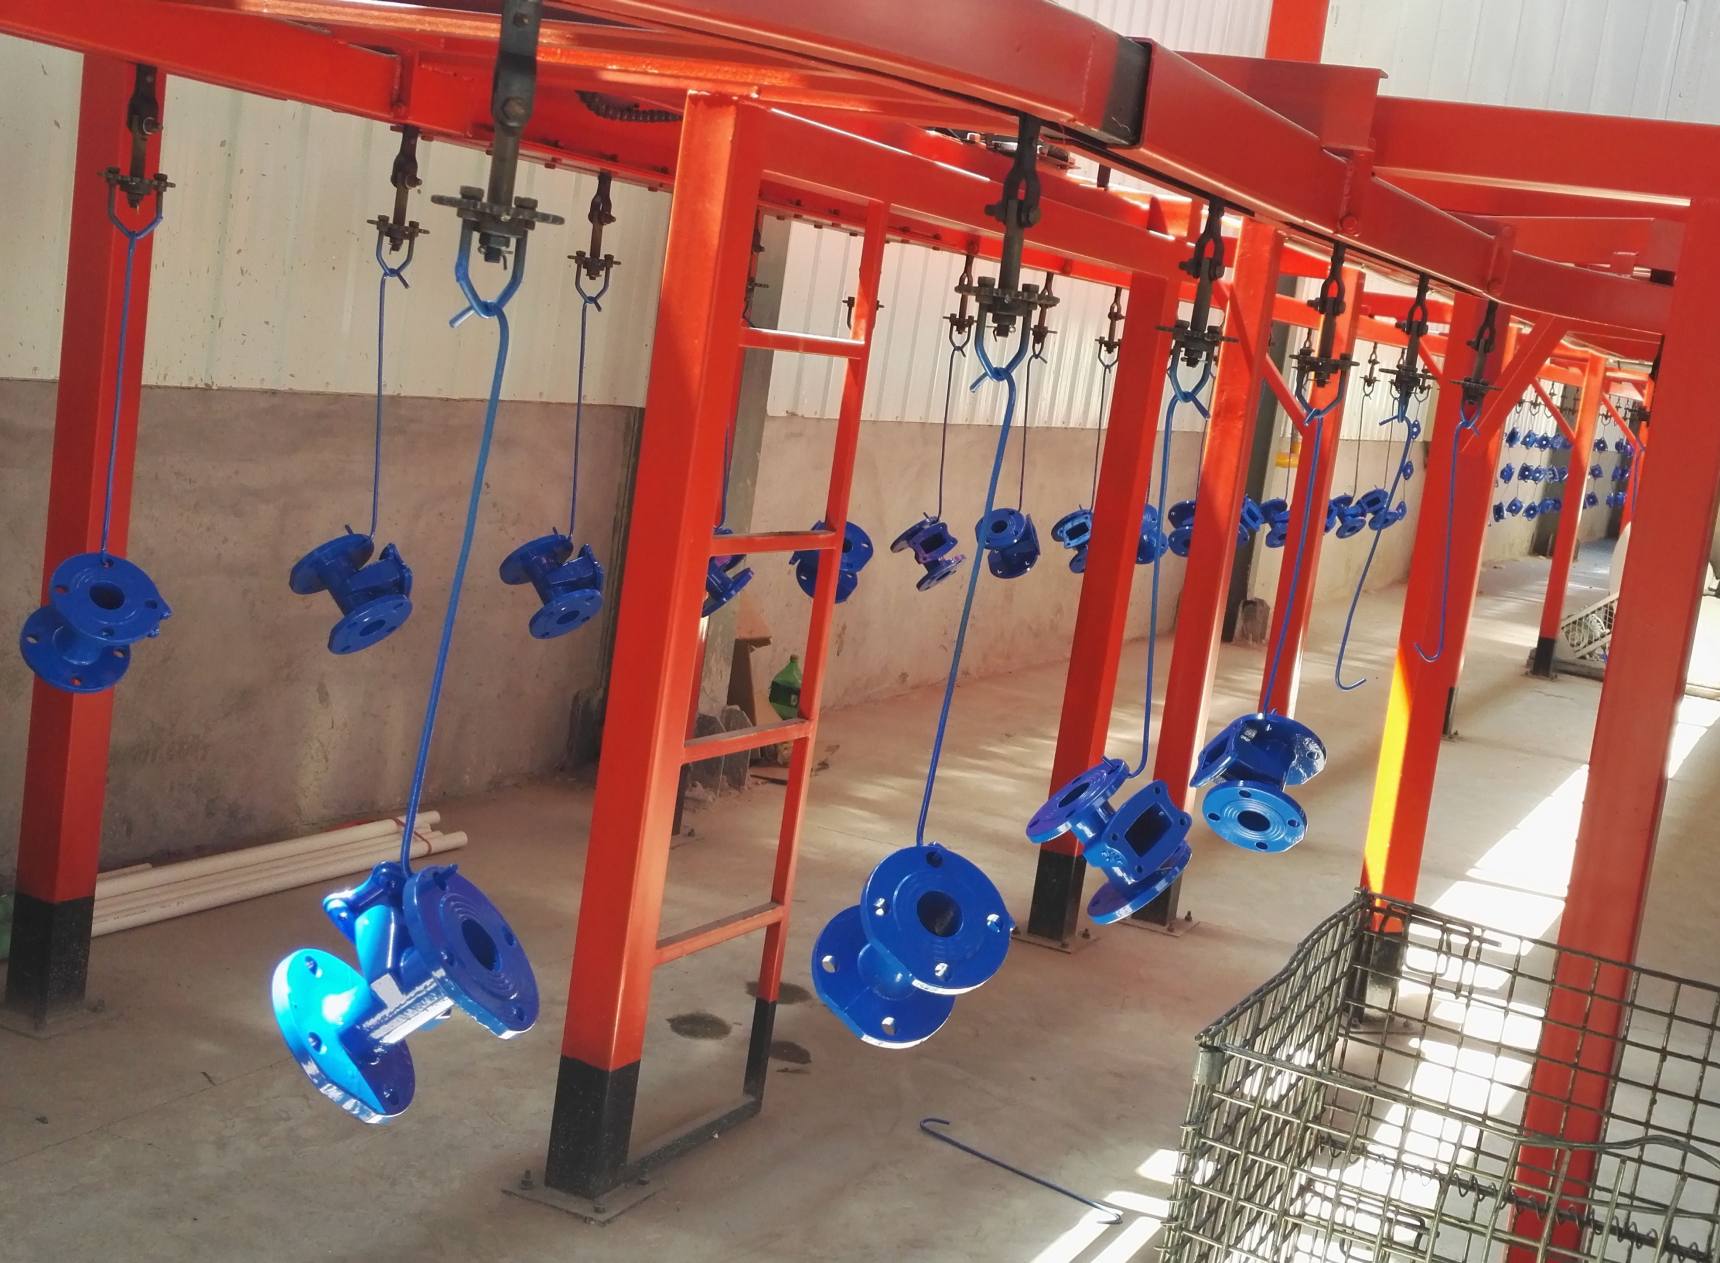 China Factory Direct Sale Large diameter Resilient seat gate valve for sale